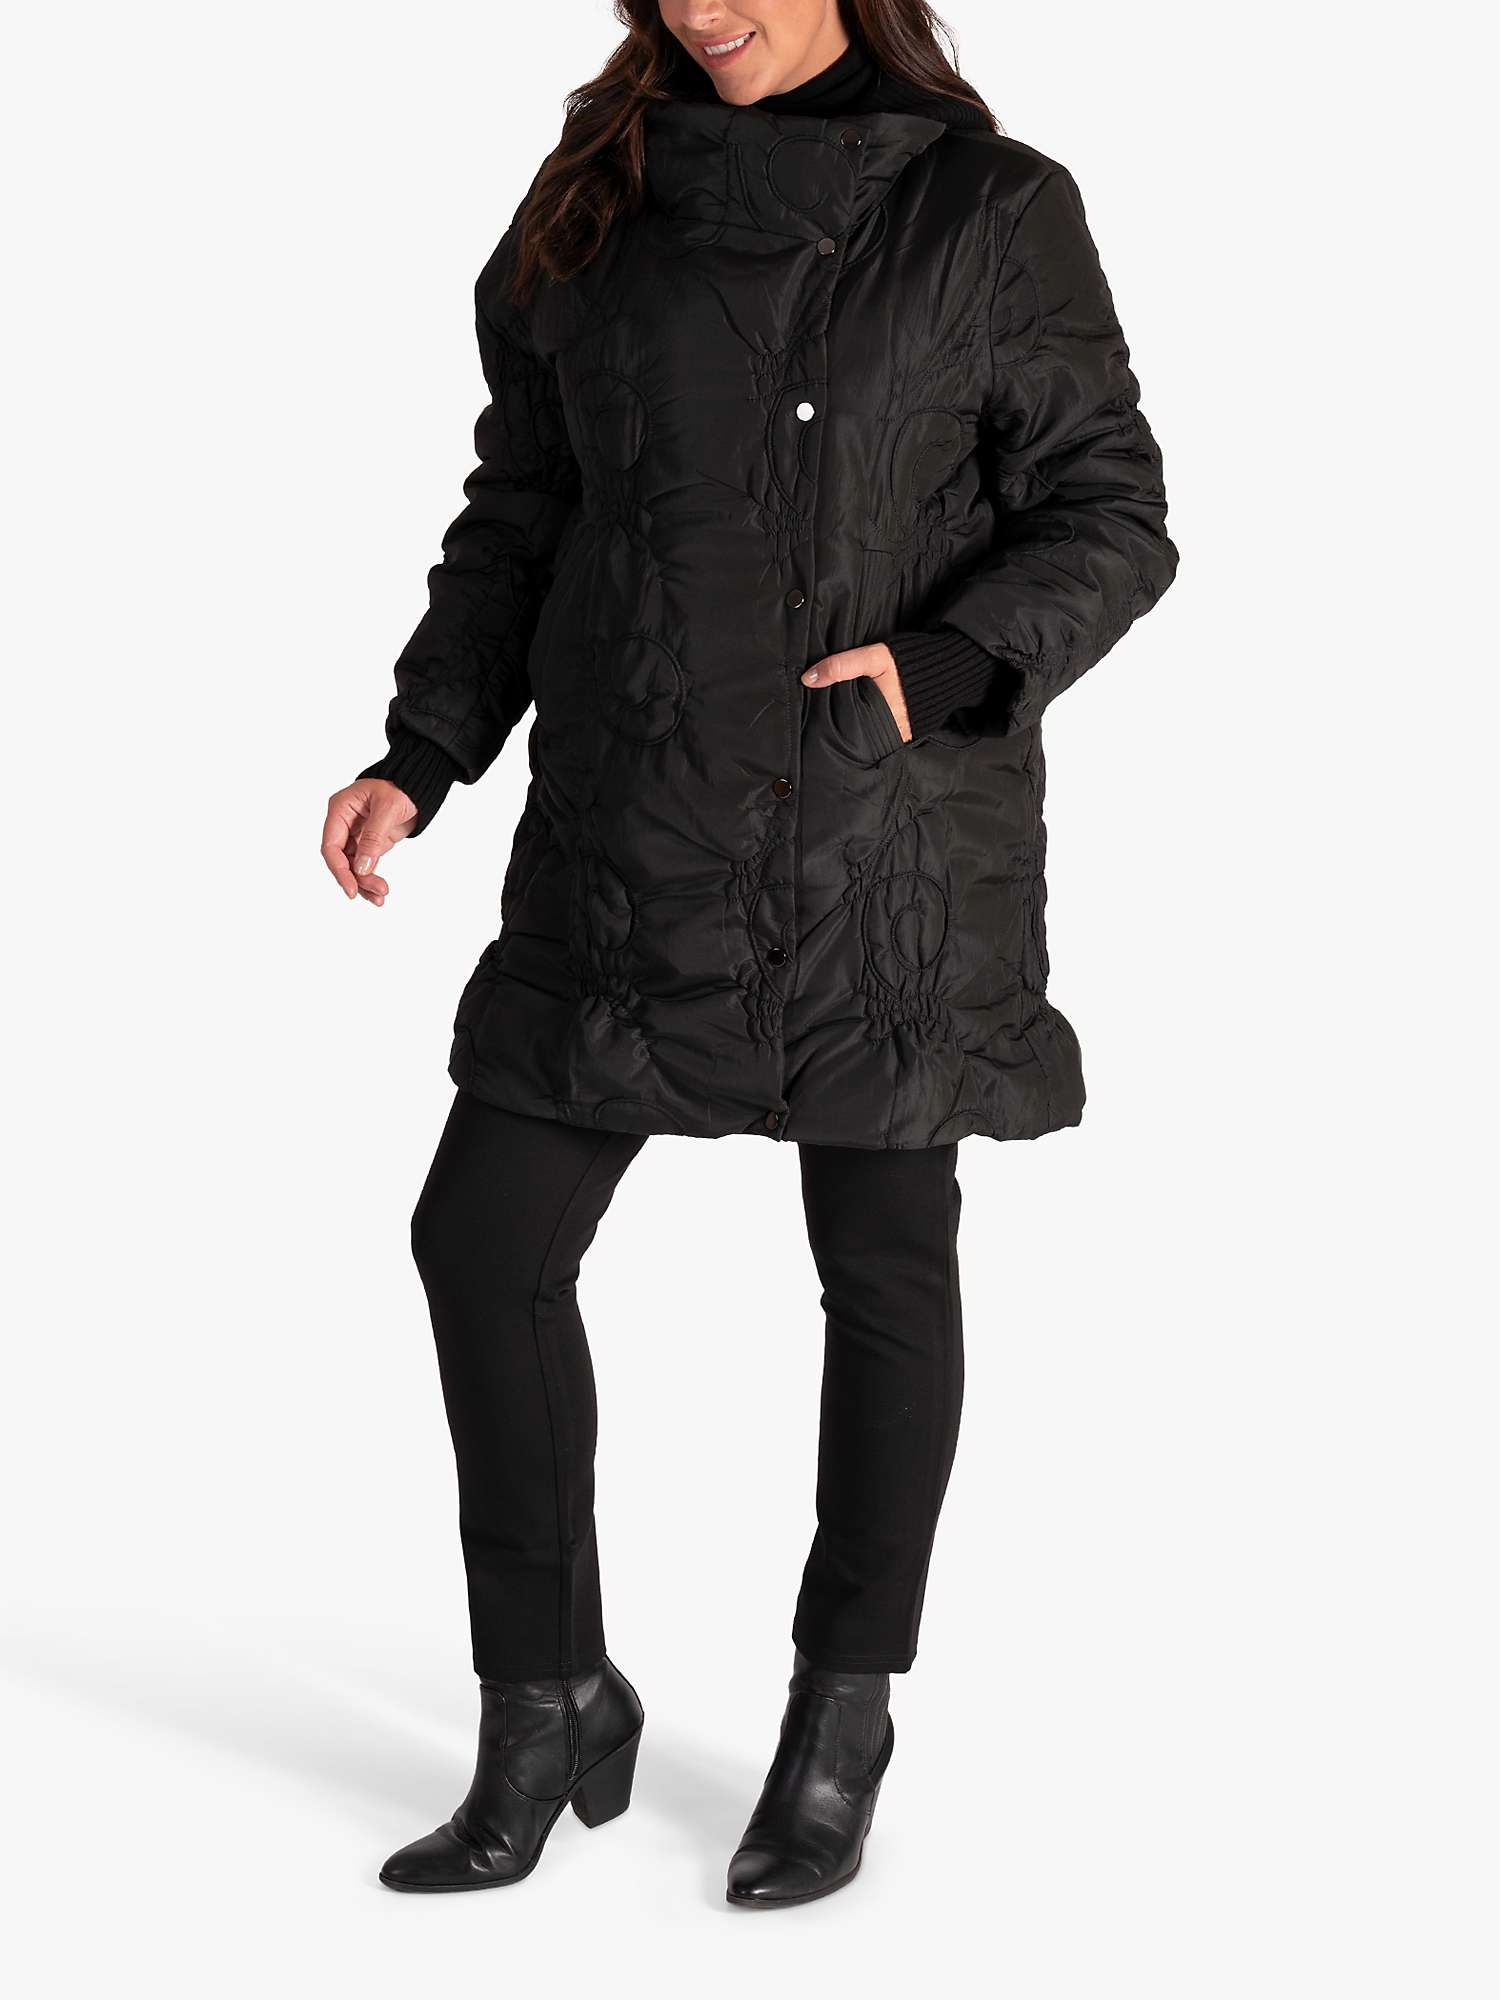 Buy chesca Quilted Embroidered Coat Online at johnlewis.com